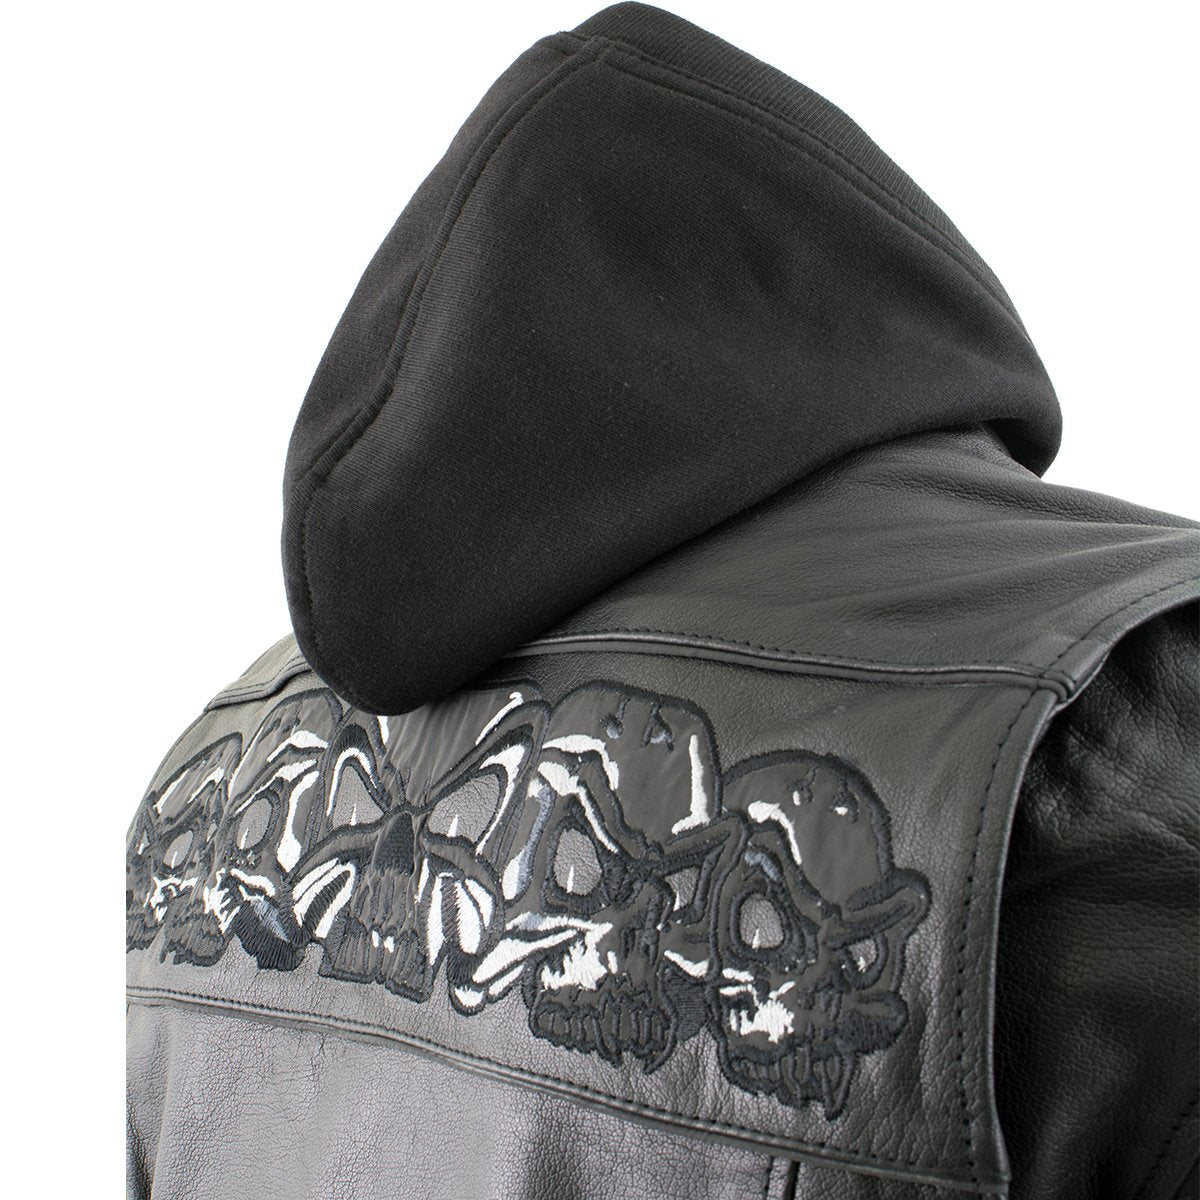 Xelement XS1504 Men's ‘Futile’ Black Armored Moto Jacket with Reflective Skulls and Hoodie